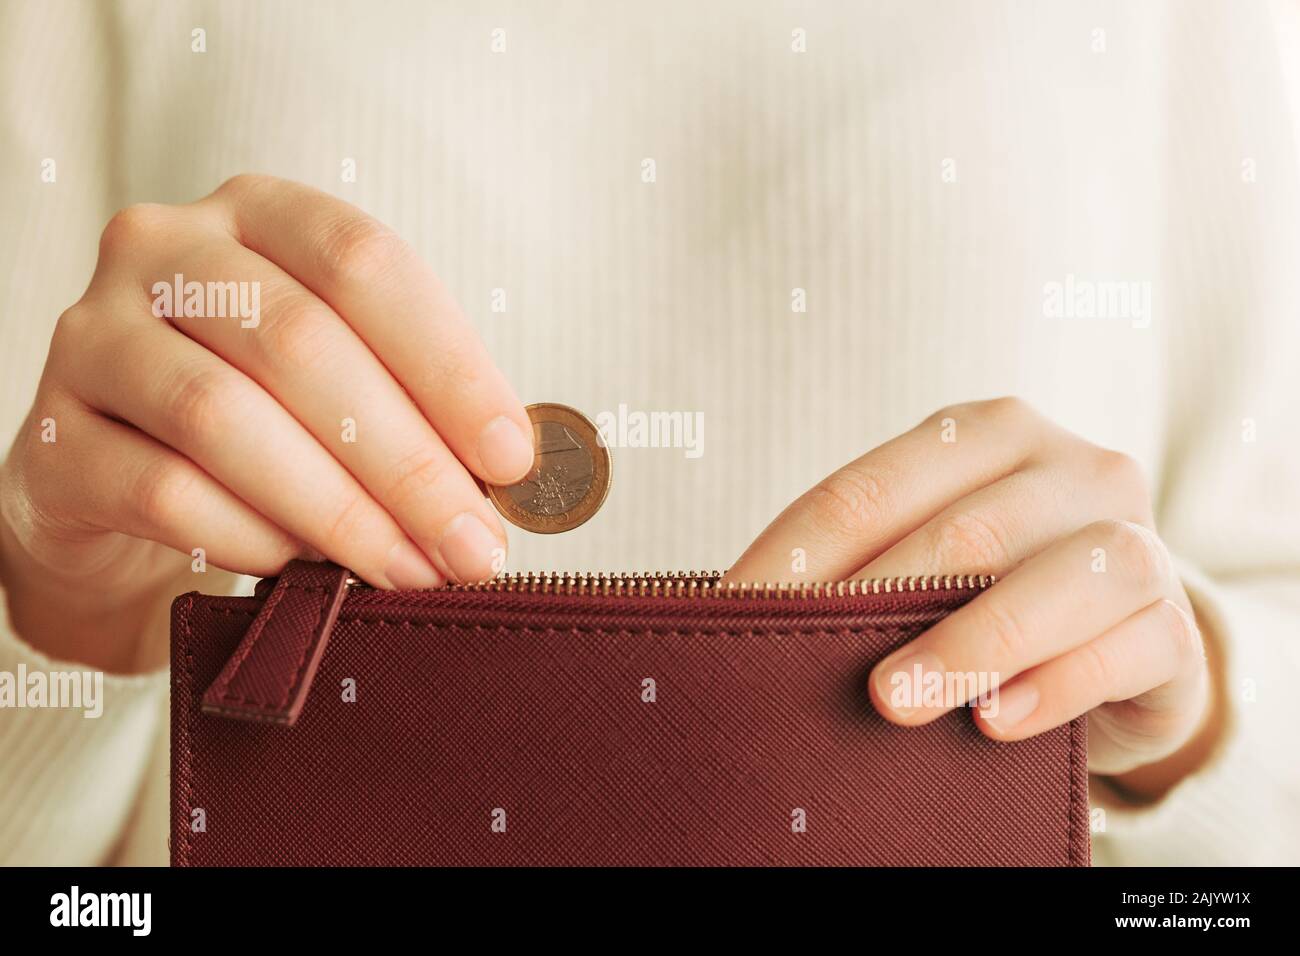 Stock photo of a woman's hands introducing a 1 euro coin in a wallet Stock Photo